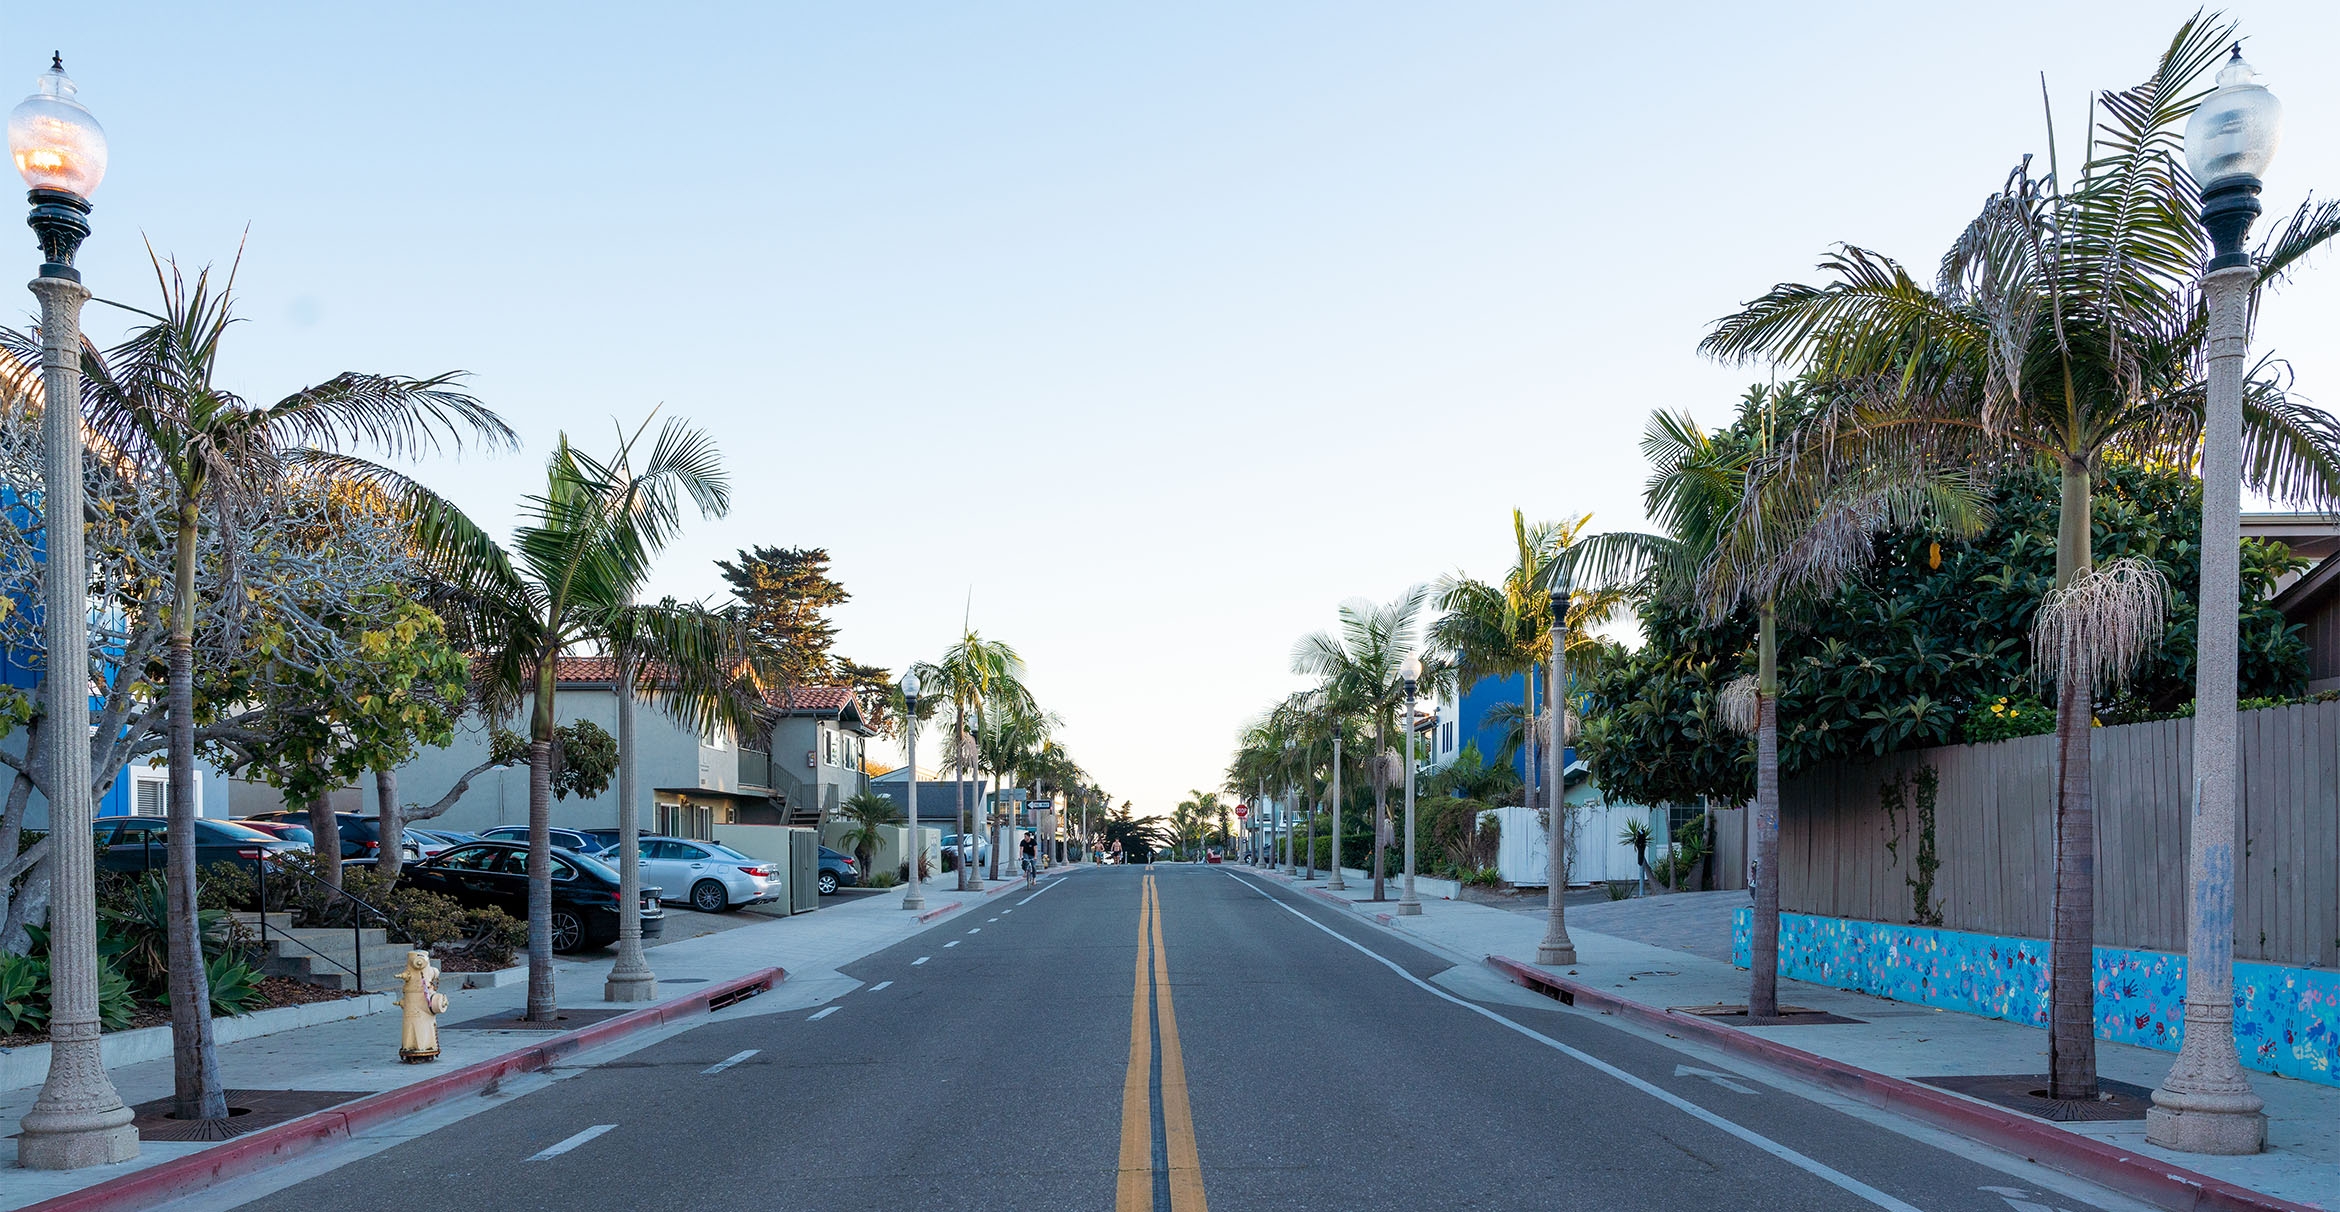 An empty street lined with palm trees